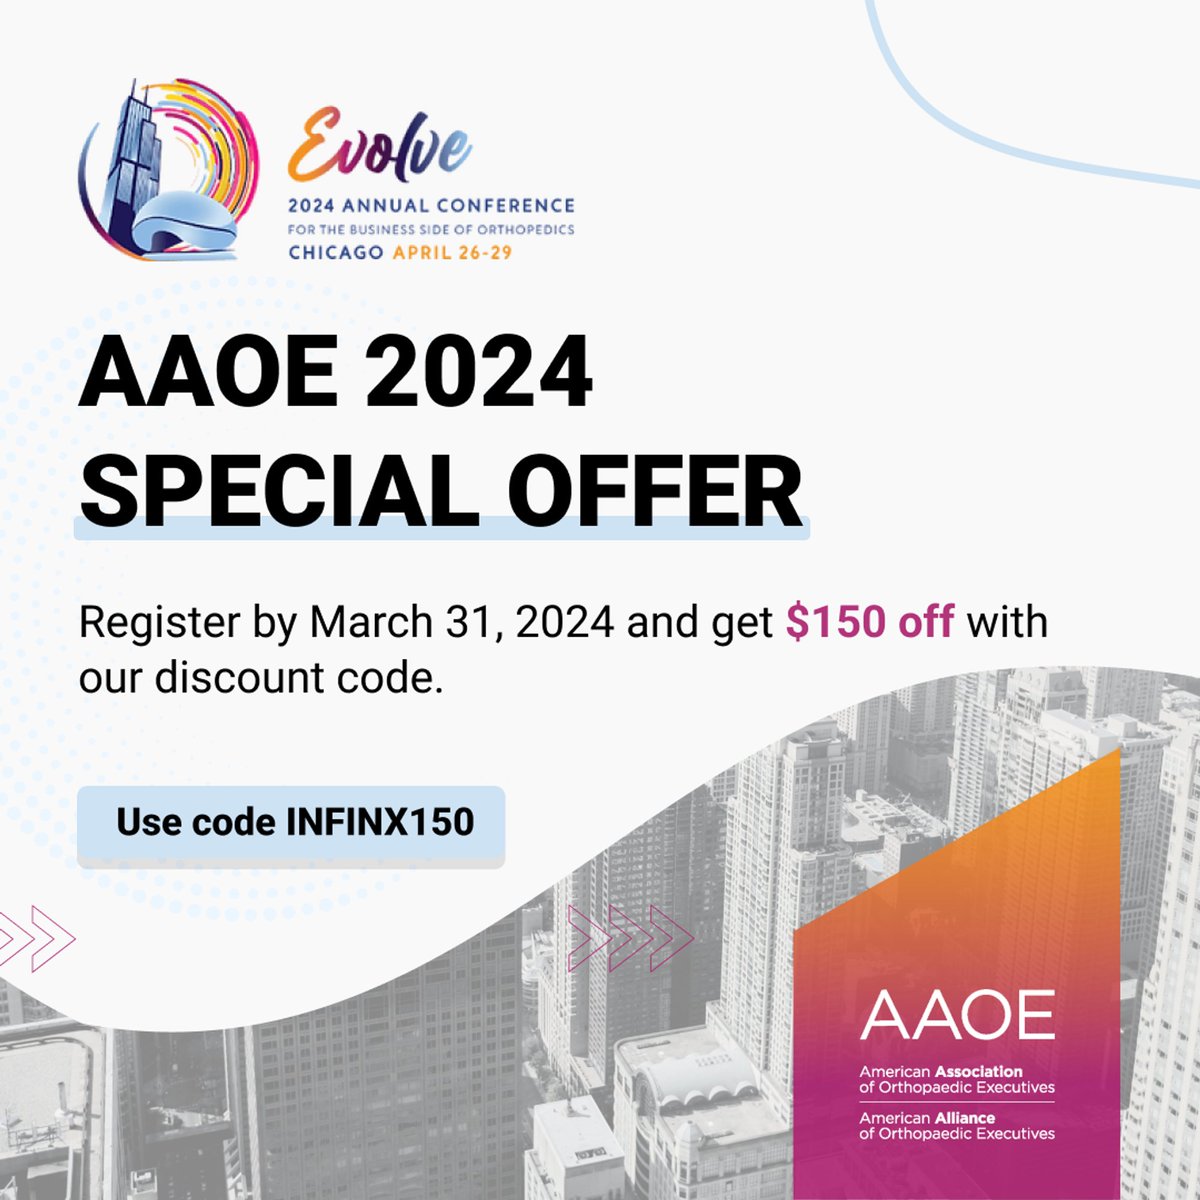 📣 AAOE extended our early bird discount code so that our community can save $150 Here’s how to claim it: 🔗 Visit hubs.li/Q02nqgdP0 🔐 Use our code at checkout: INFINX150 🗓 Code extended until March 31, 2024 See you in Chicago! #AAOE #AAOE2024 #OrthopedicRCM